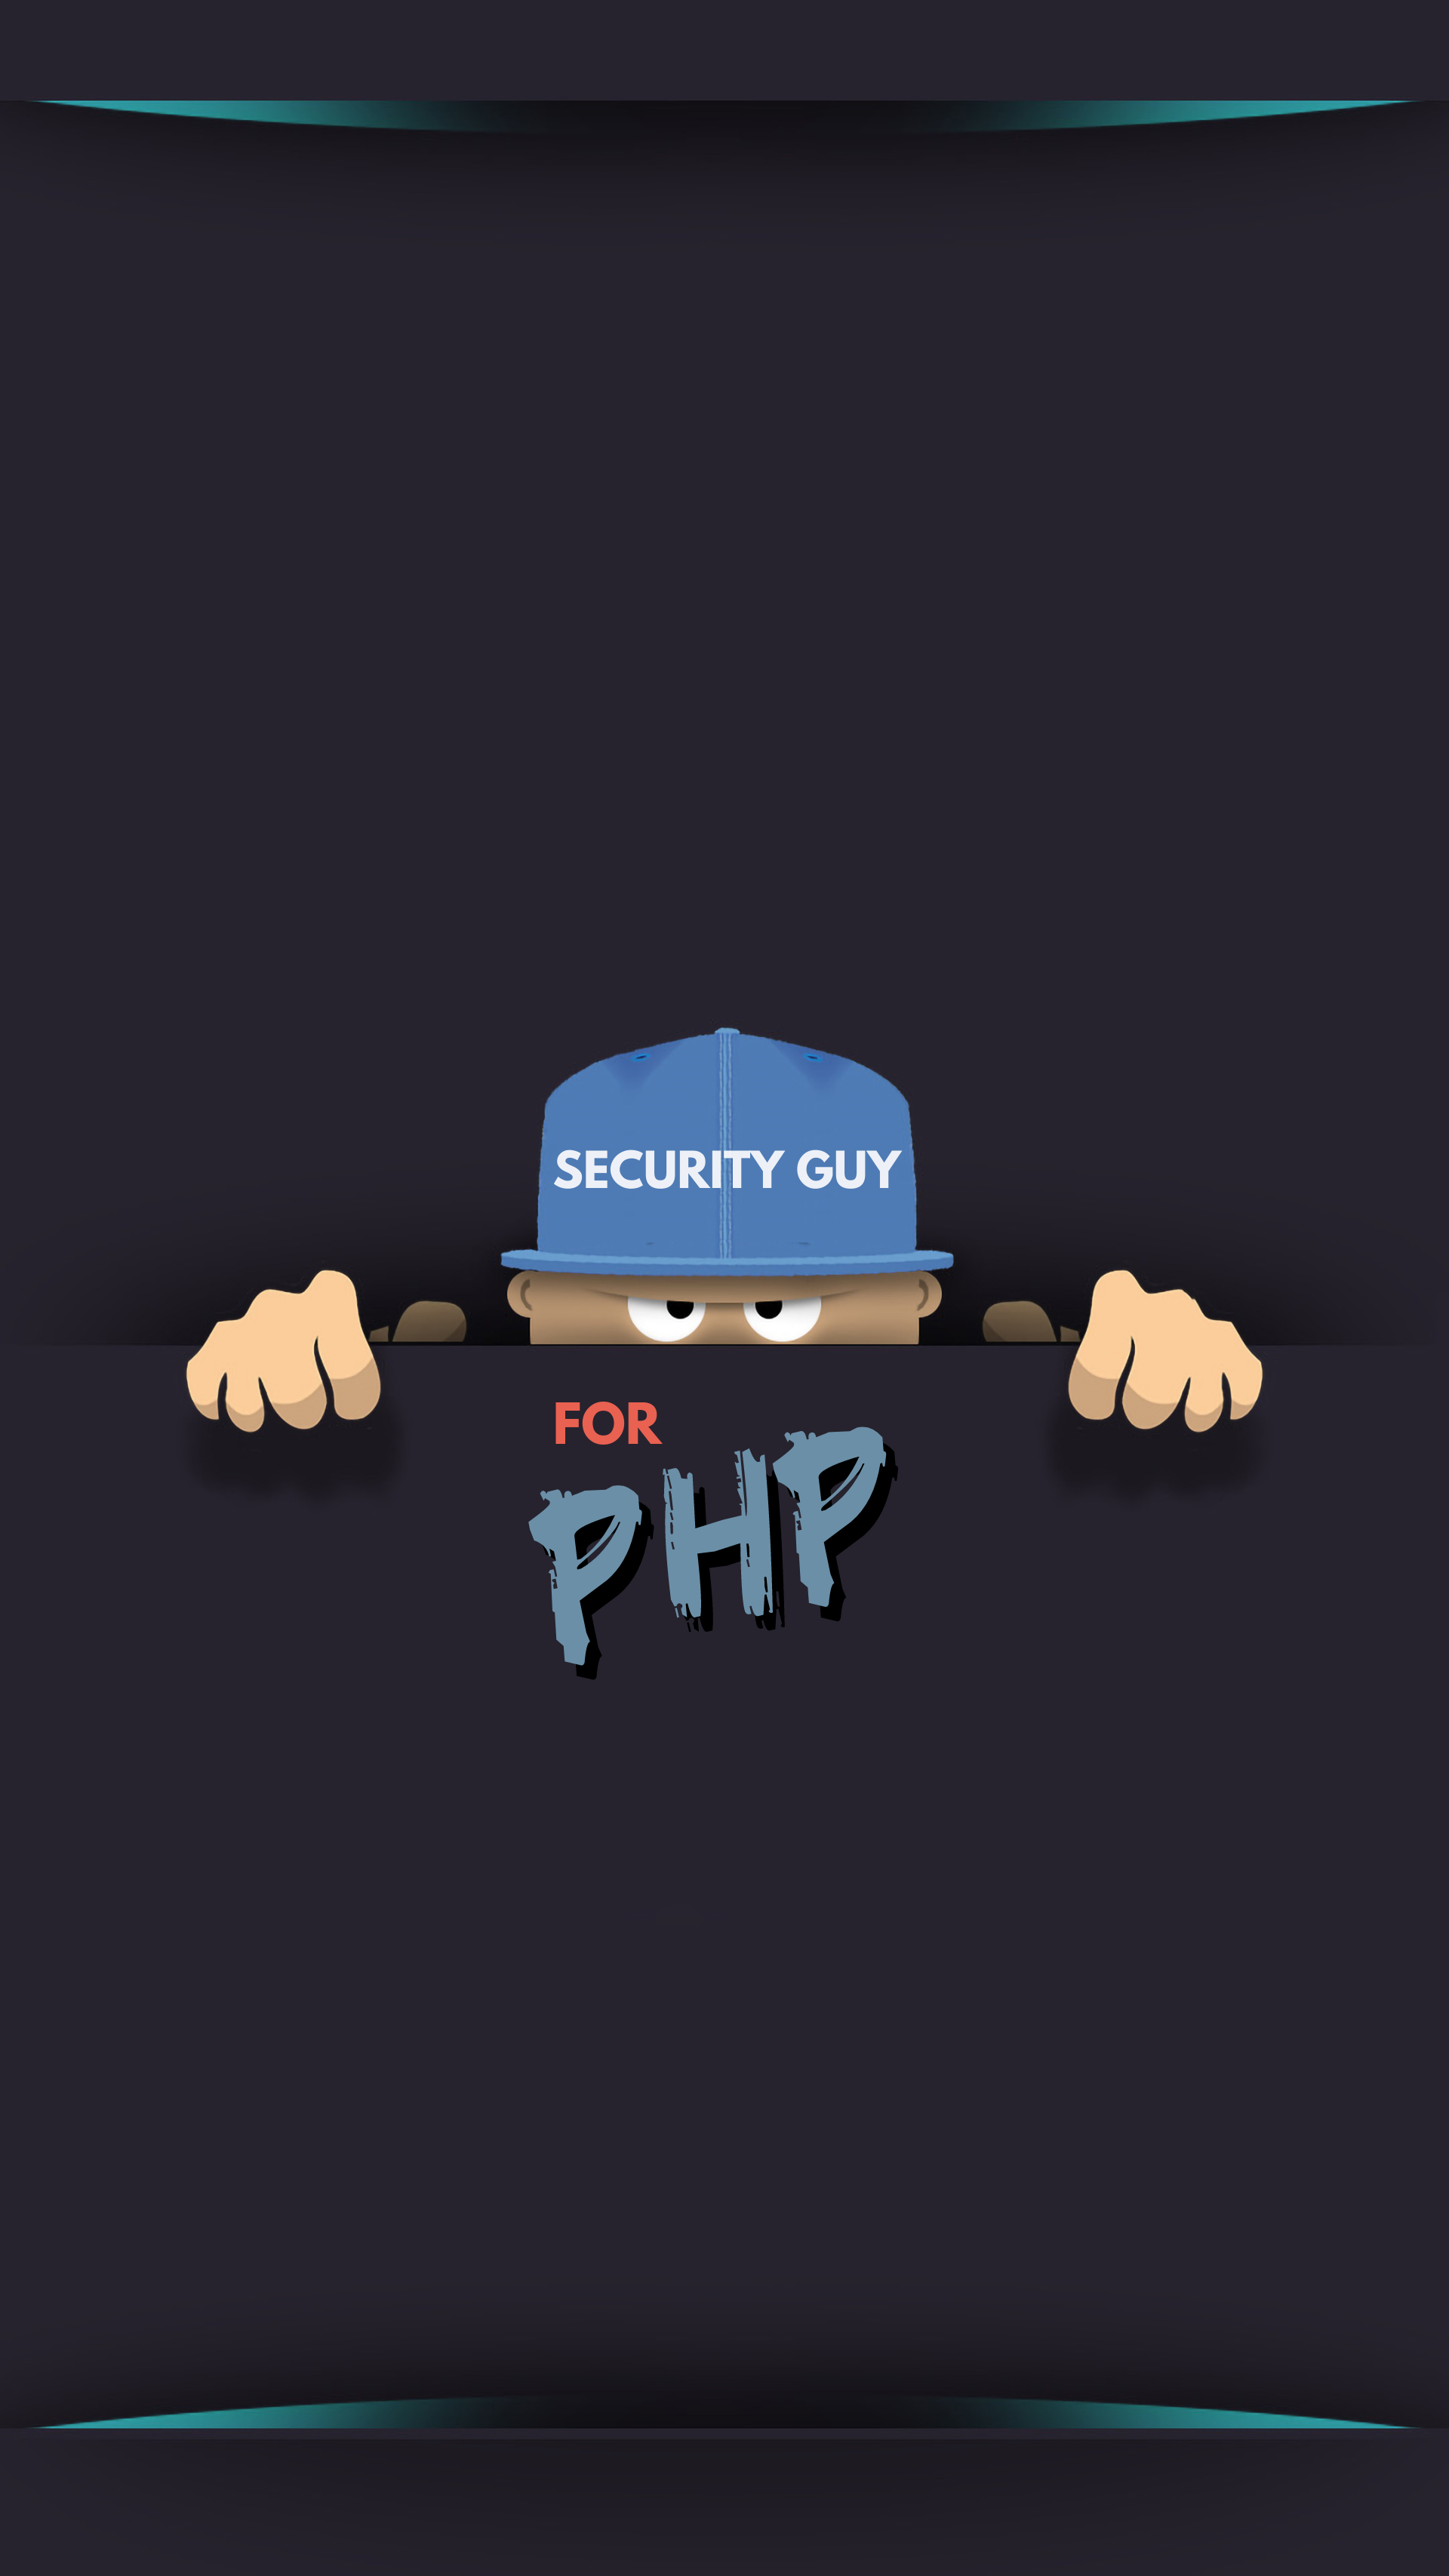 best php programmers